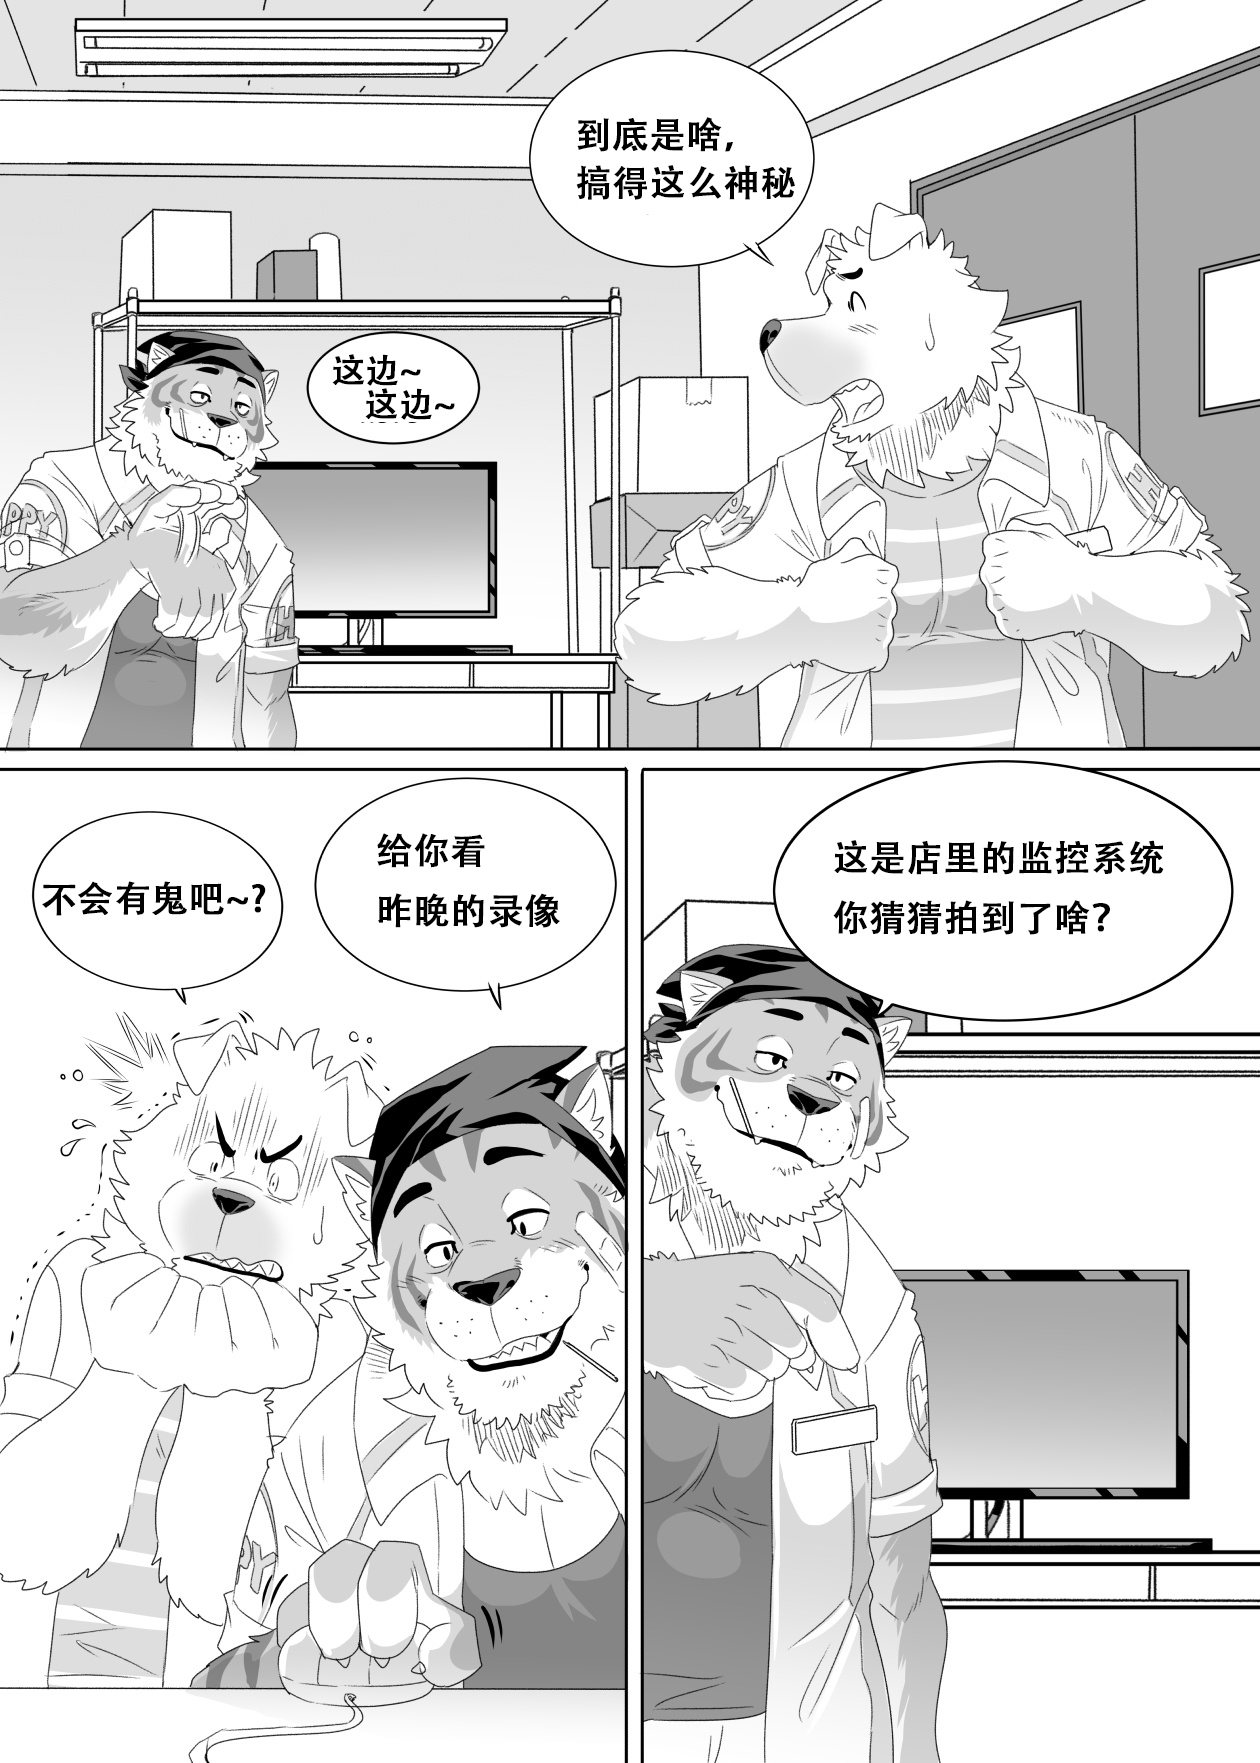 [KUMAHACHI] - "开心"便利店 ["Happy" Convenience Store] [Chinese] 